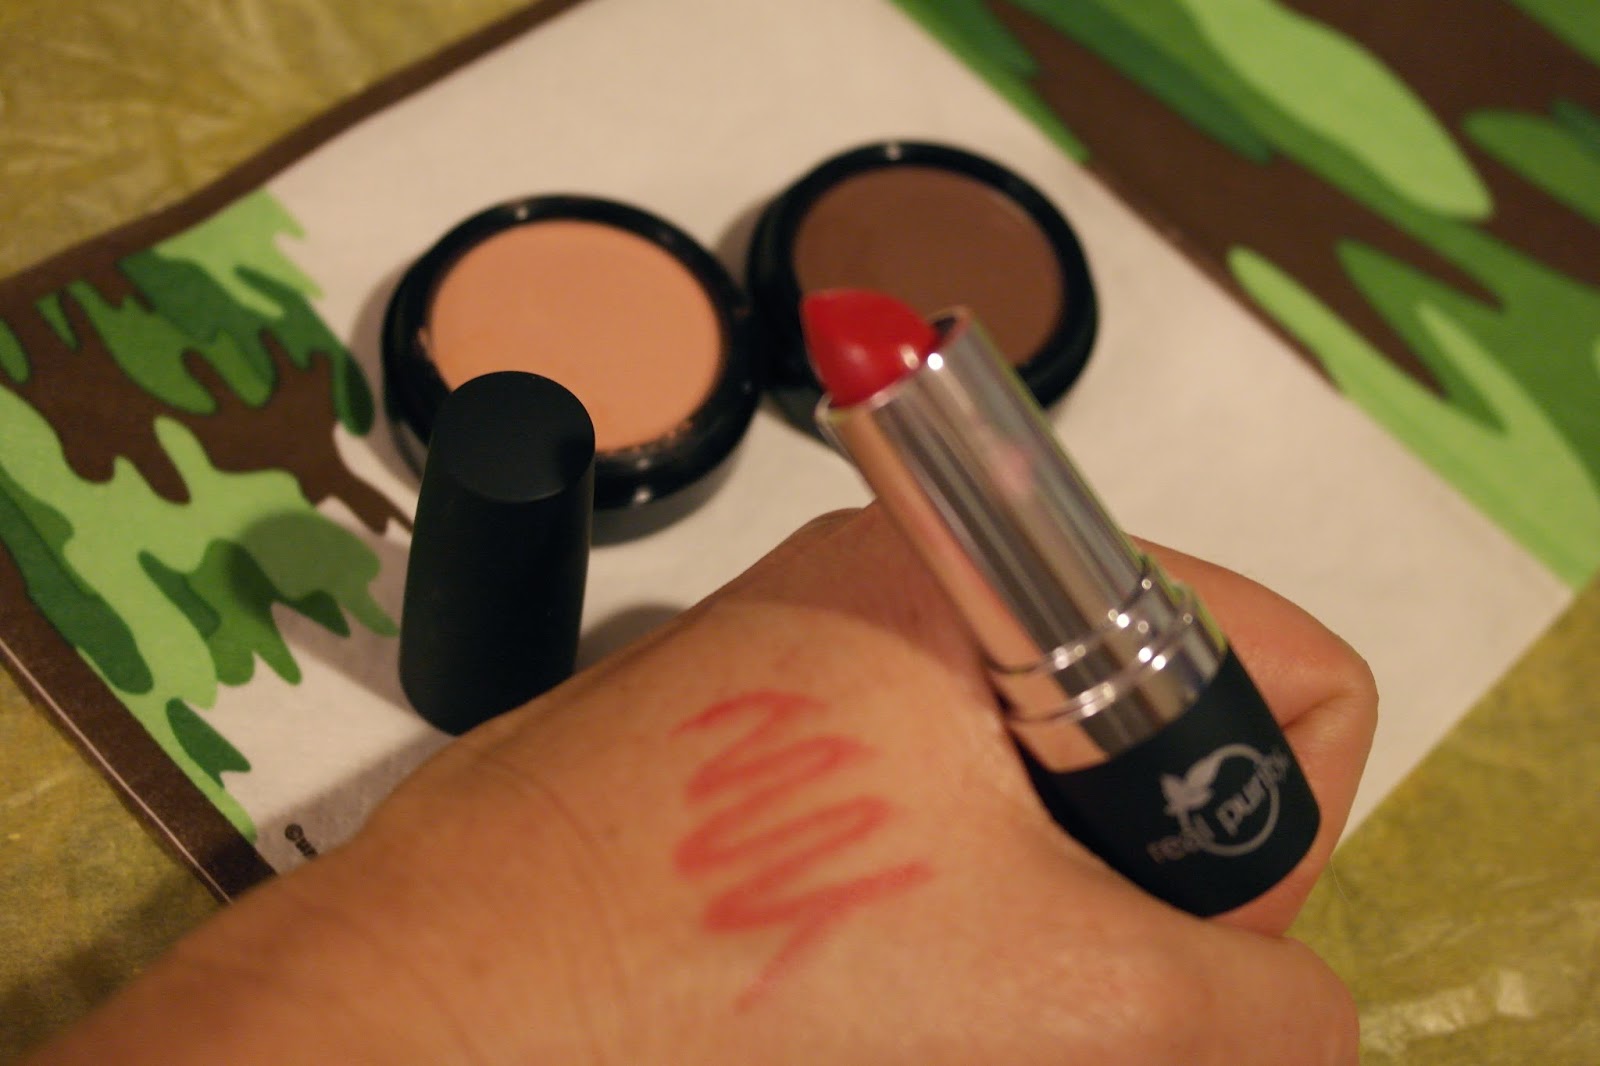 Makeup University Inc: Real Purity cosmetics for nature inspired beauty  gift giving